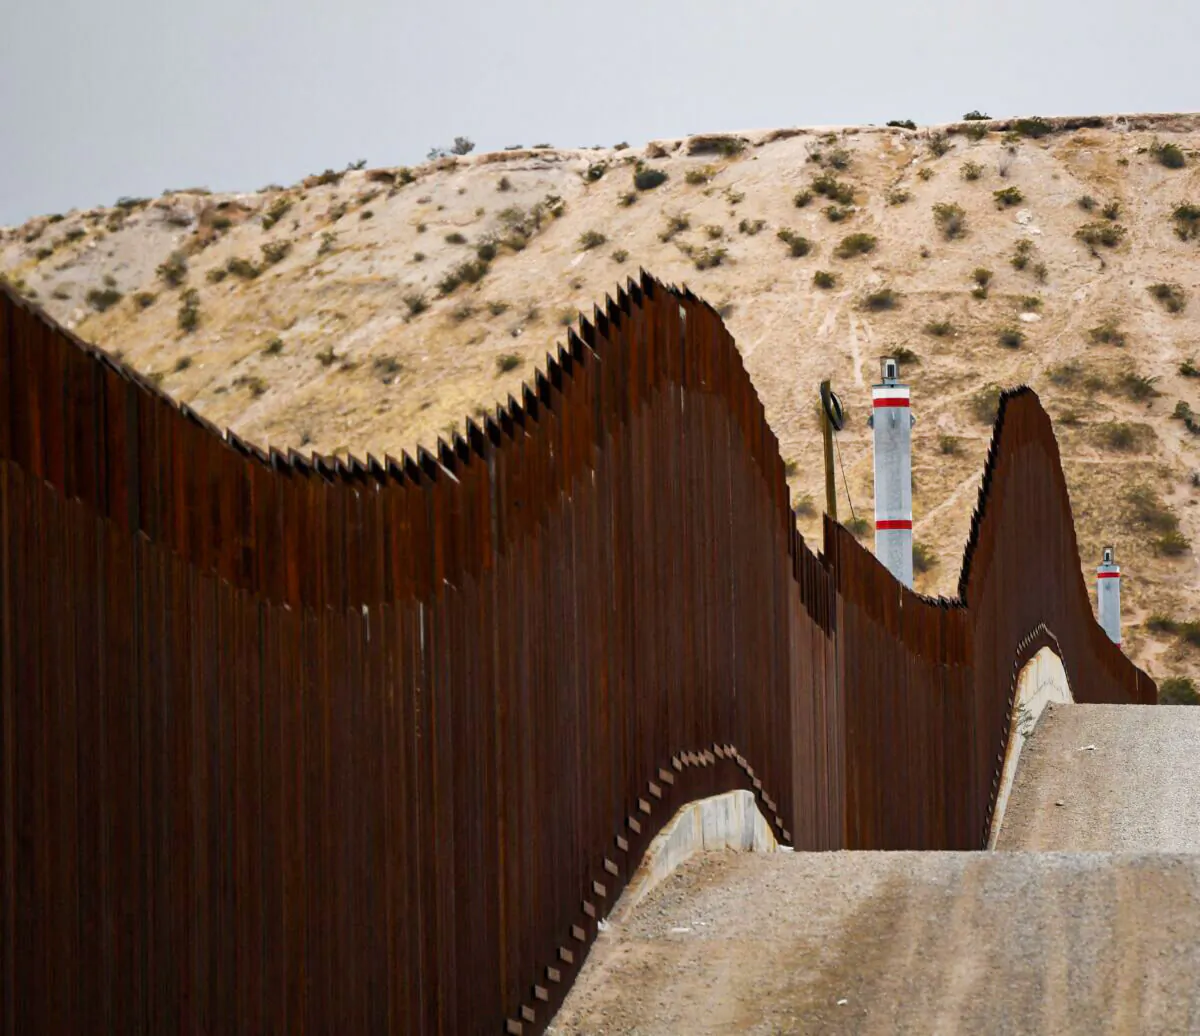 A US Border Patrol vehicle sits next to a border wall in the El Paso Sector along the U.S.-Mexico border between New Mexico and Chihuahua state,  in Sunland Park, New Mexico, on Dec. 9, 2021. (Patrick T. Fallon/AFP via Getty Images)